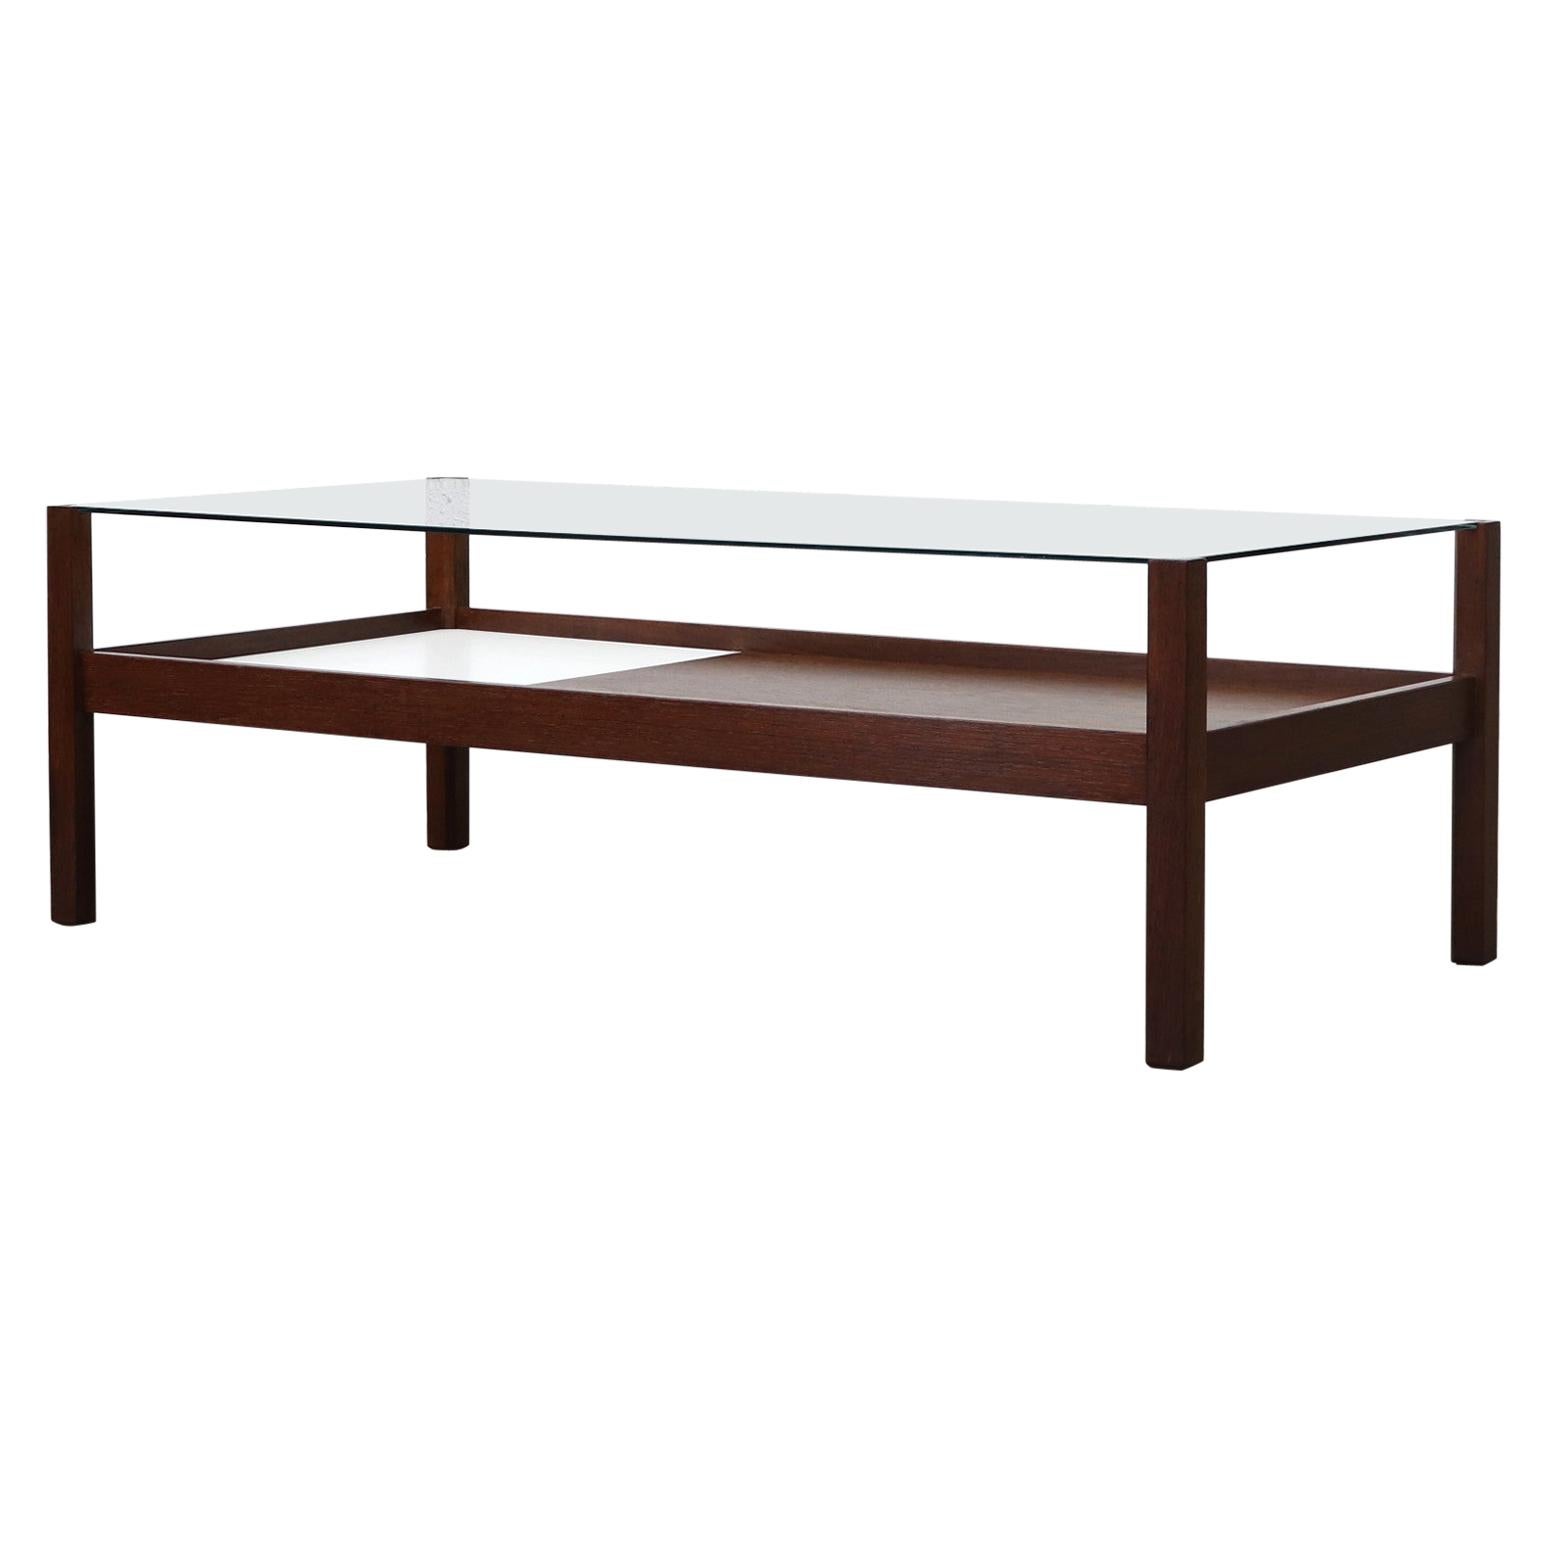 Kho Liang Le for t'Spectrum Wenge and Glass Coffee Table